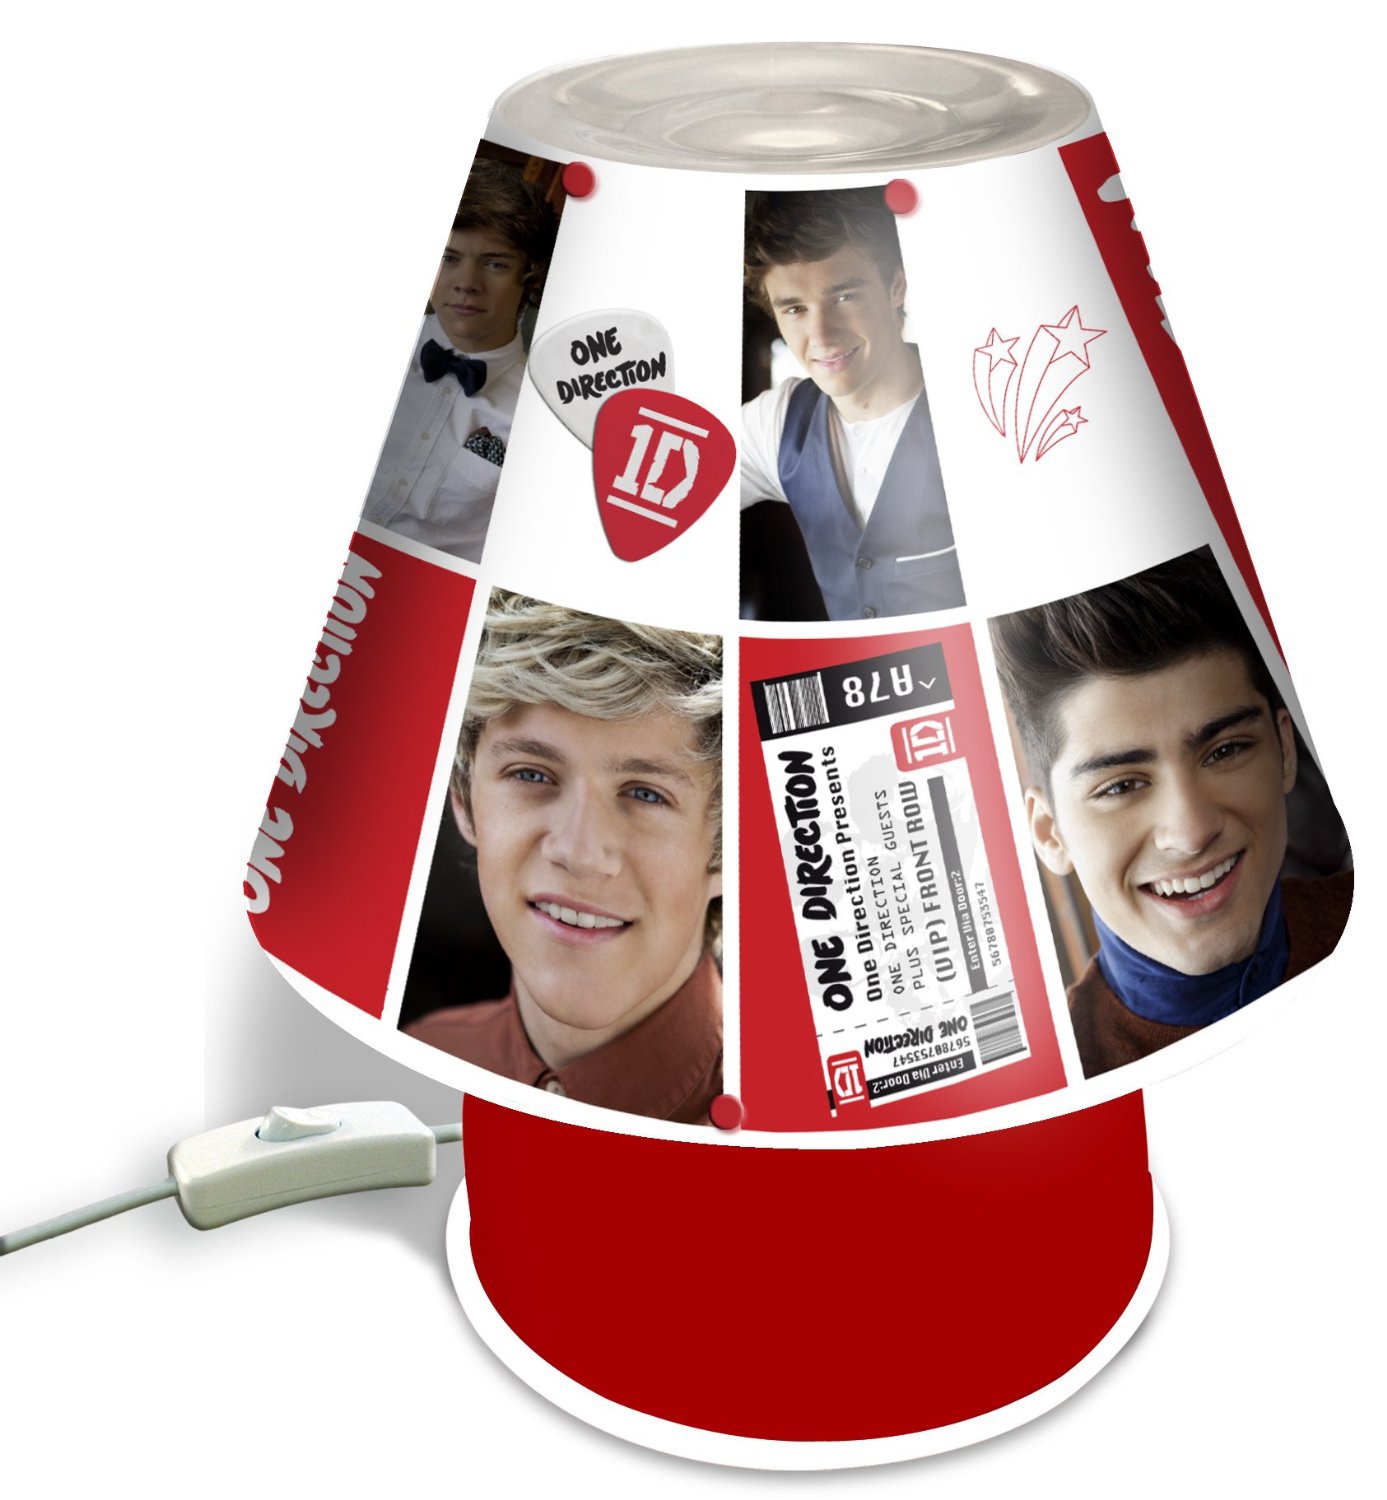 One Direction 'Collage' Kool Lamp